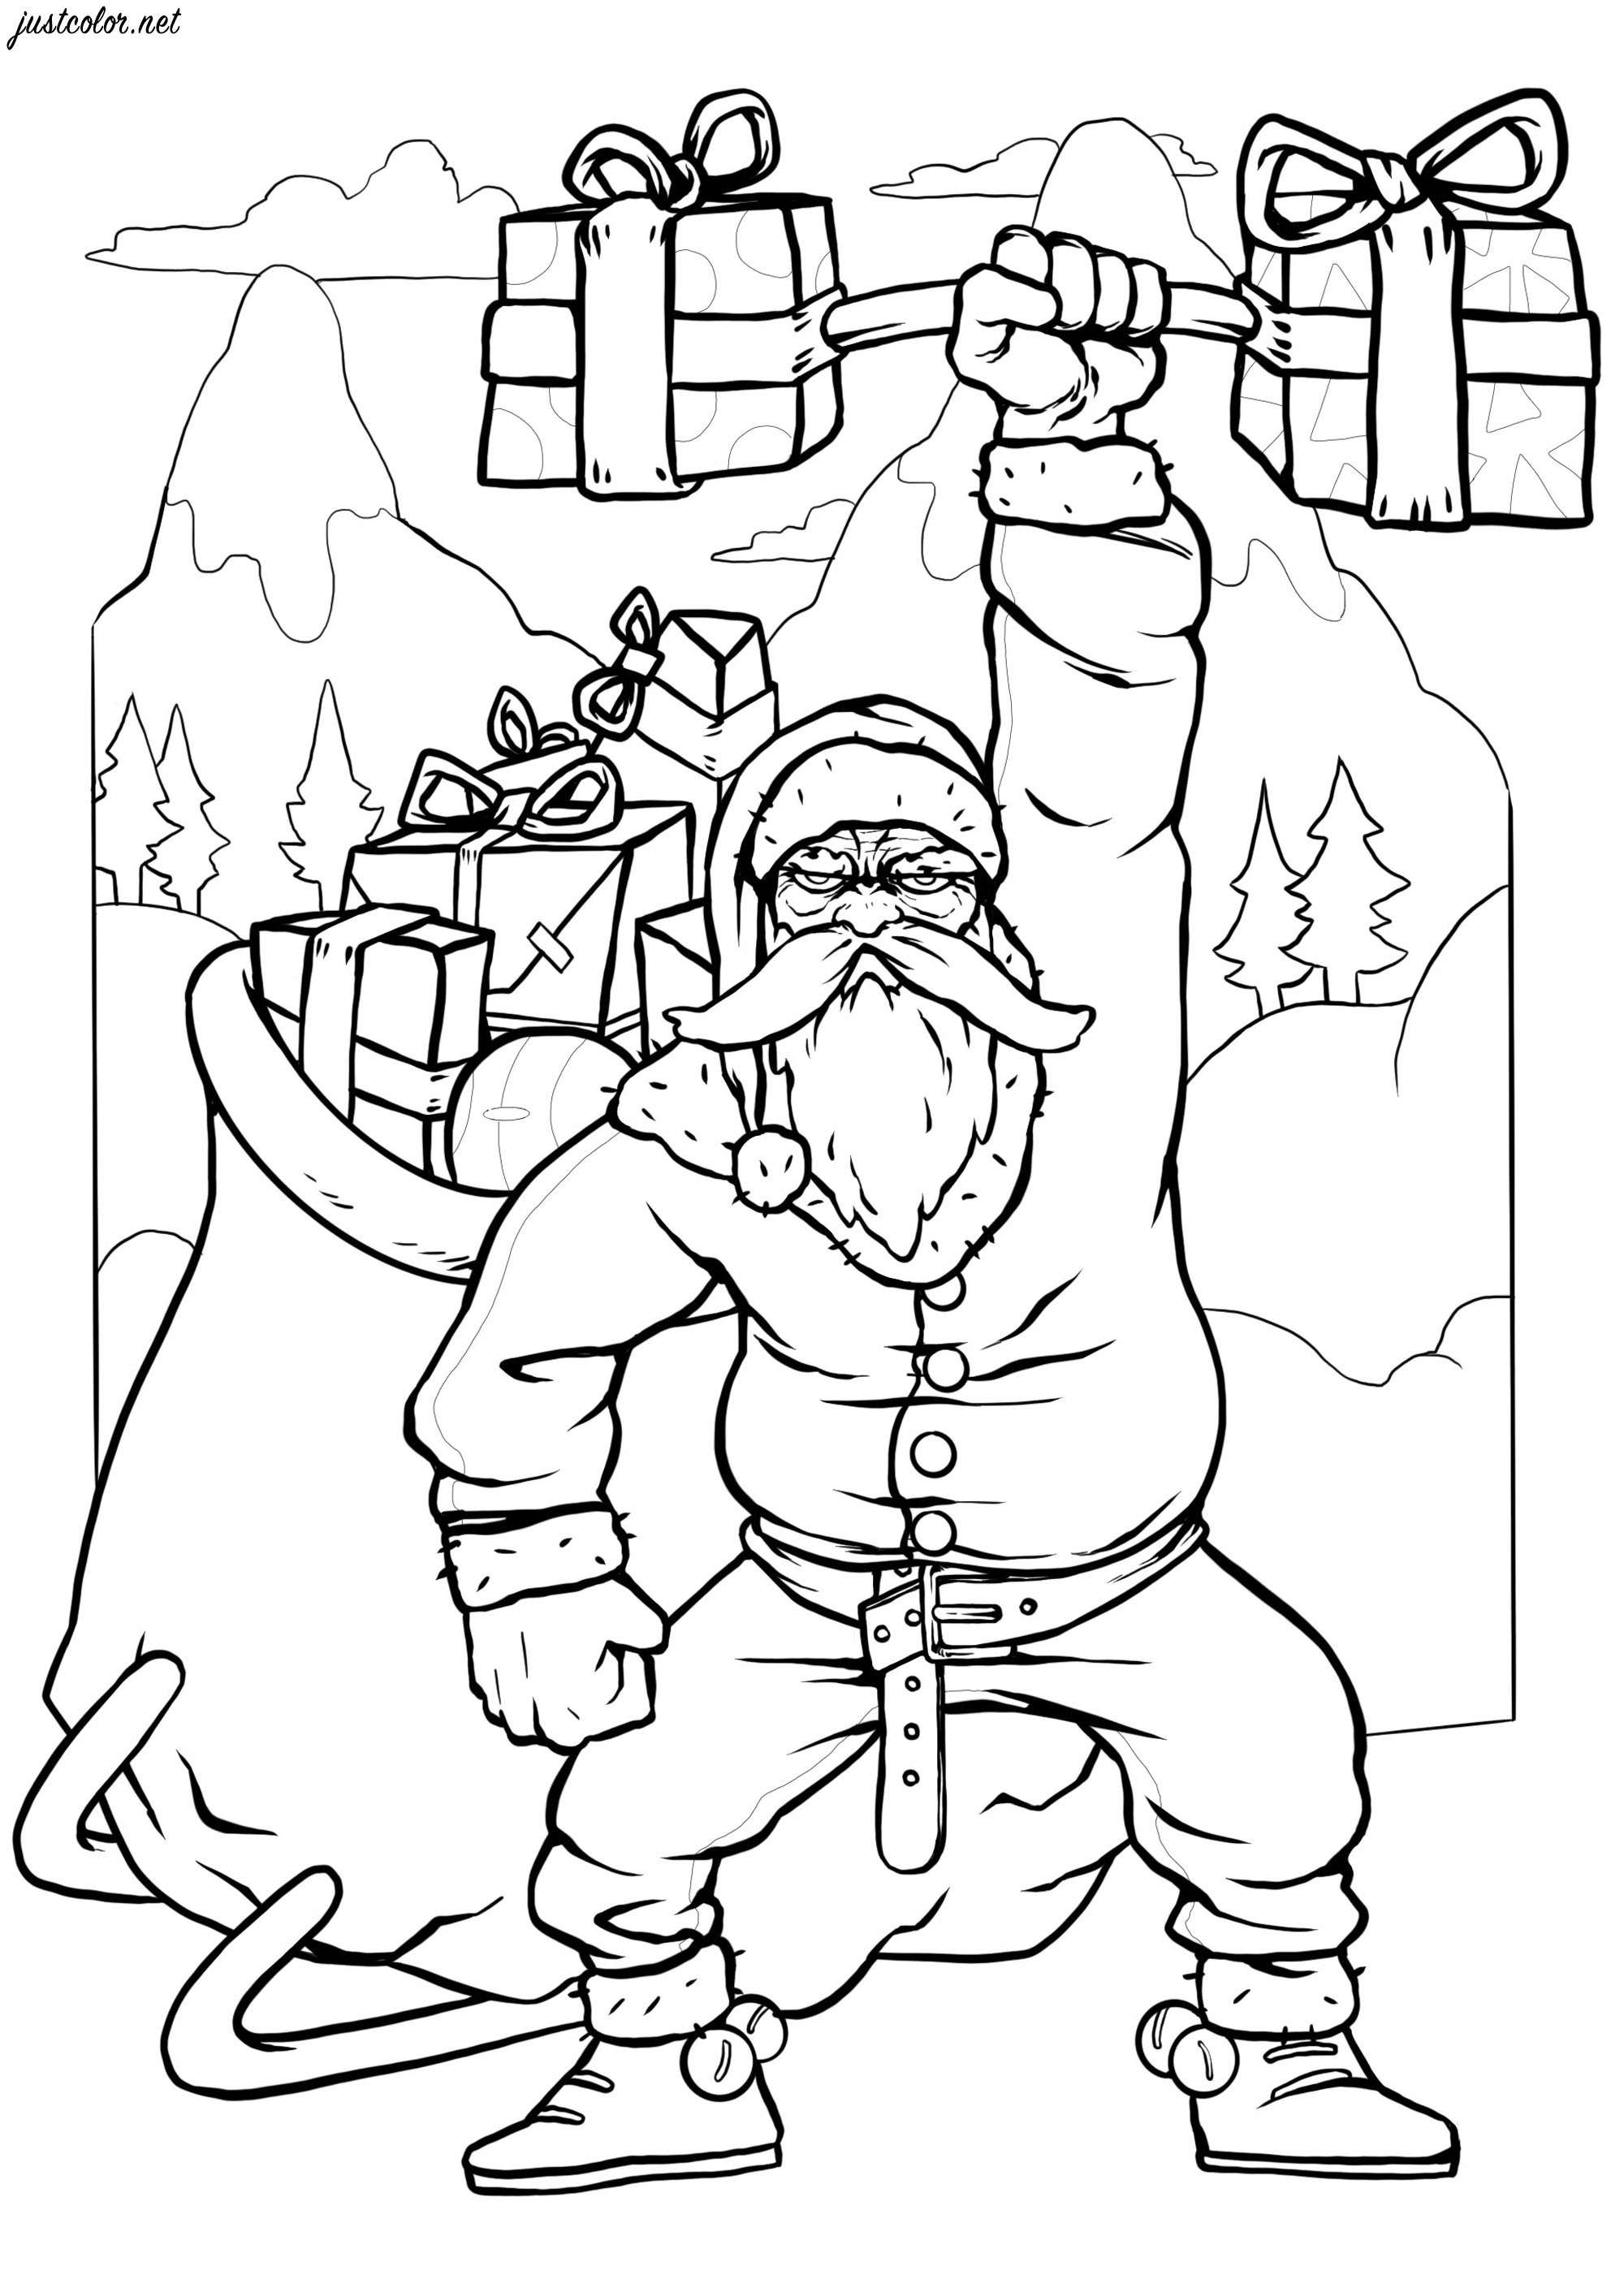 The strongest Santa ever - Christmas Adult Coloring Pages